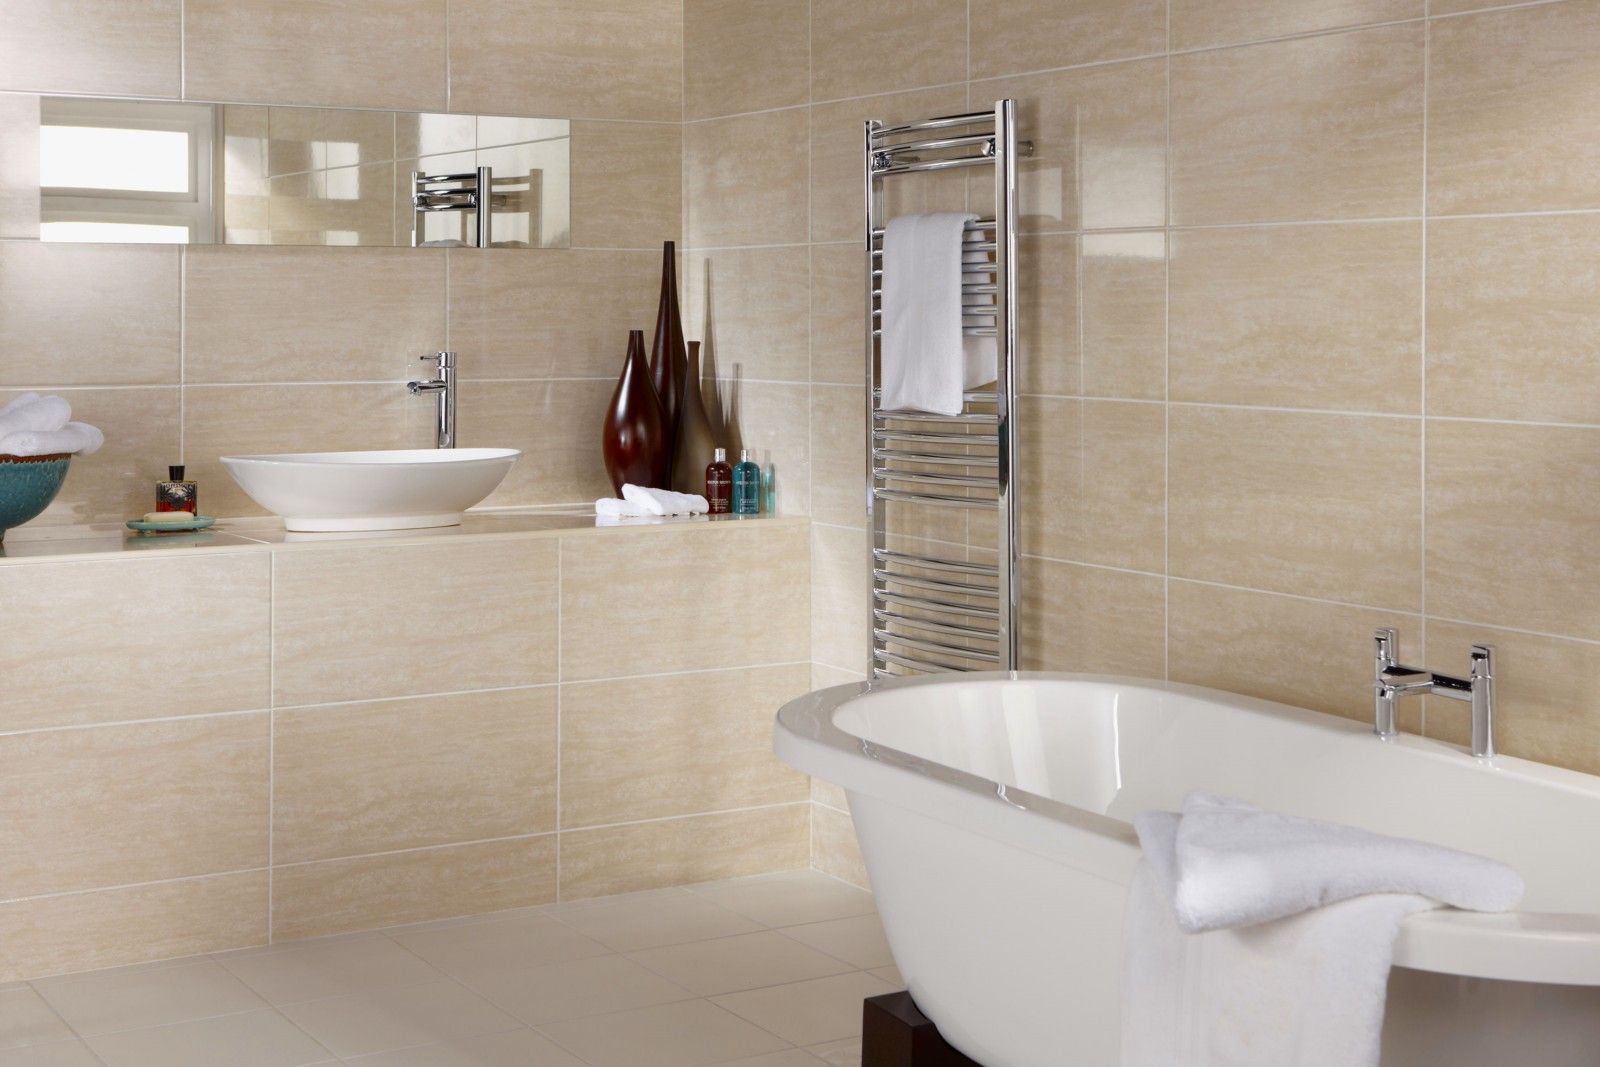 Beginner's guide to tiling a bathroom